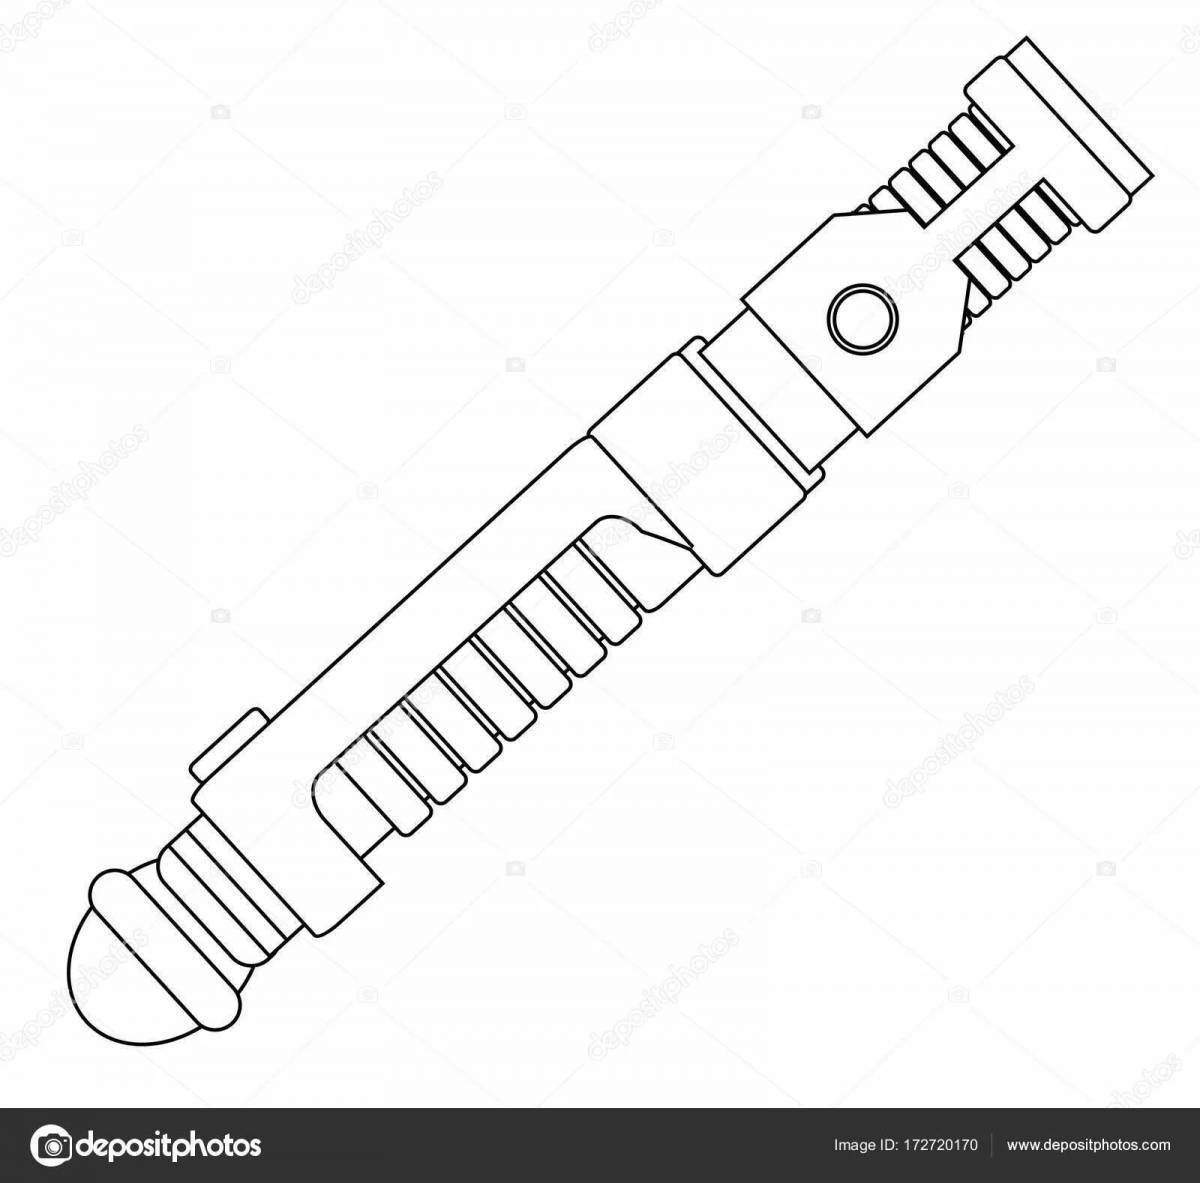 Playful laser sword coloring page